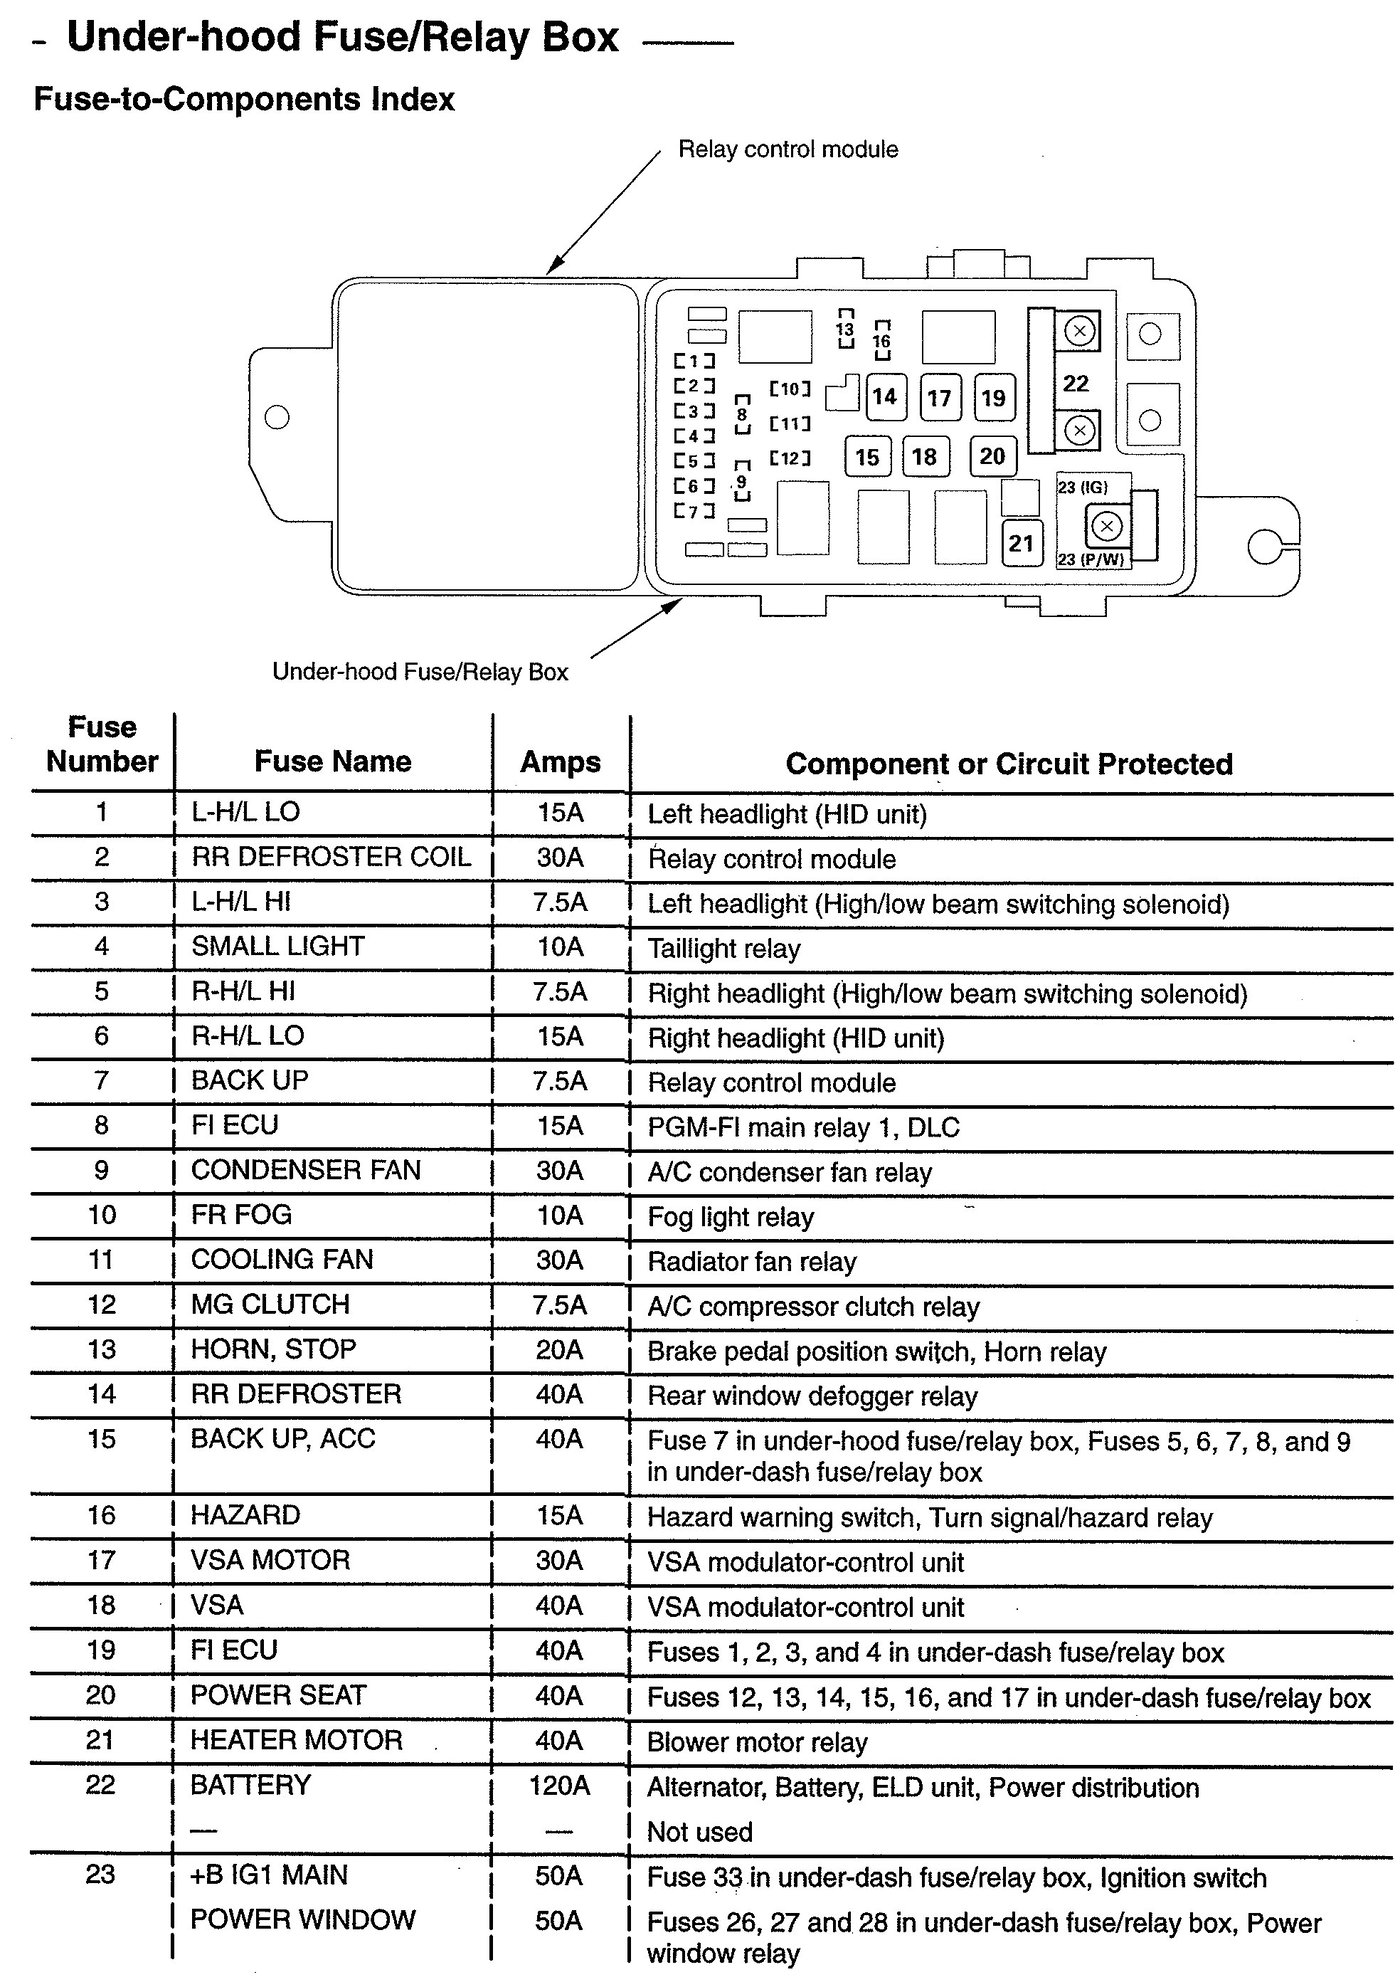 2005 Acura Rsx Wiring Diagram - Wiring Diagram acura rsx stereo wiring diagram 